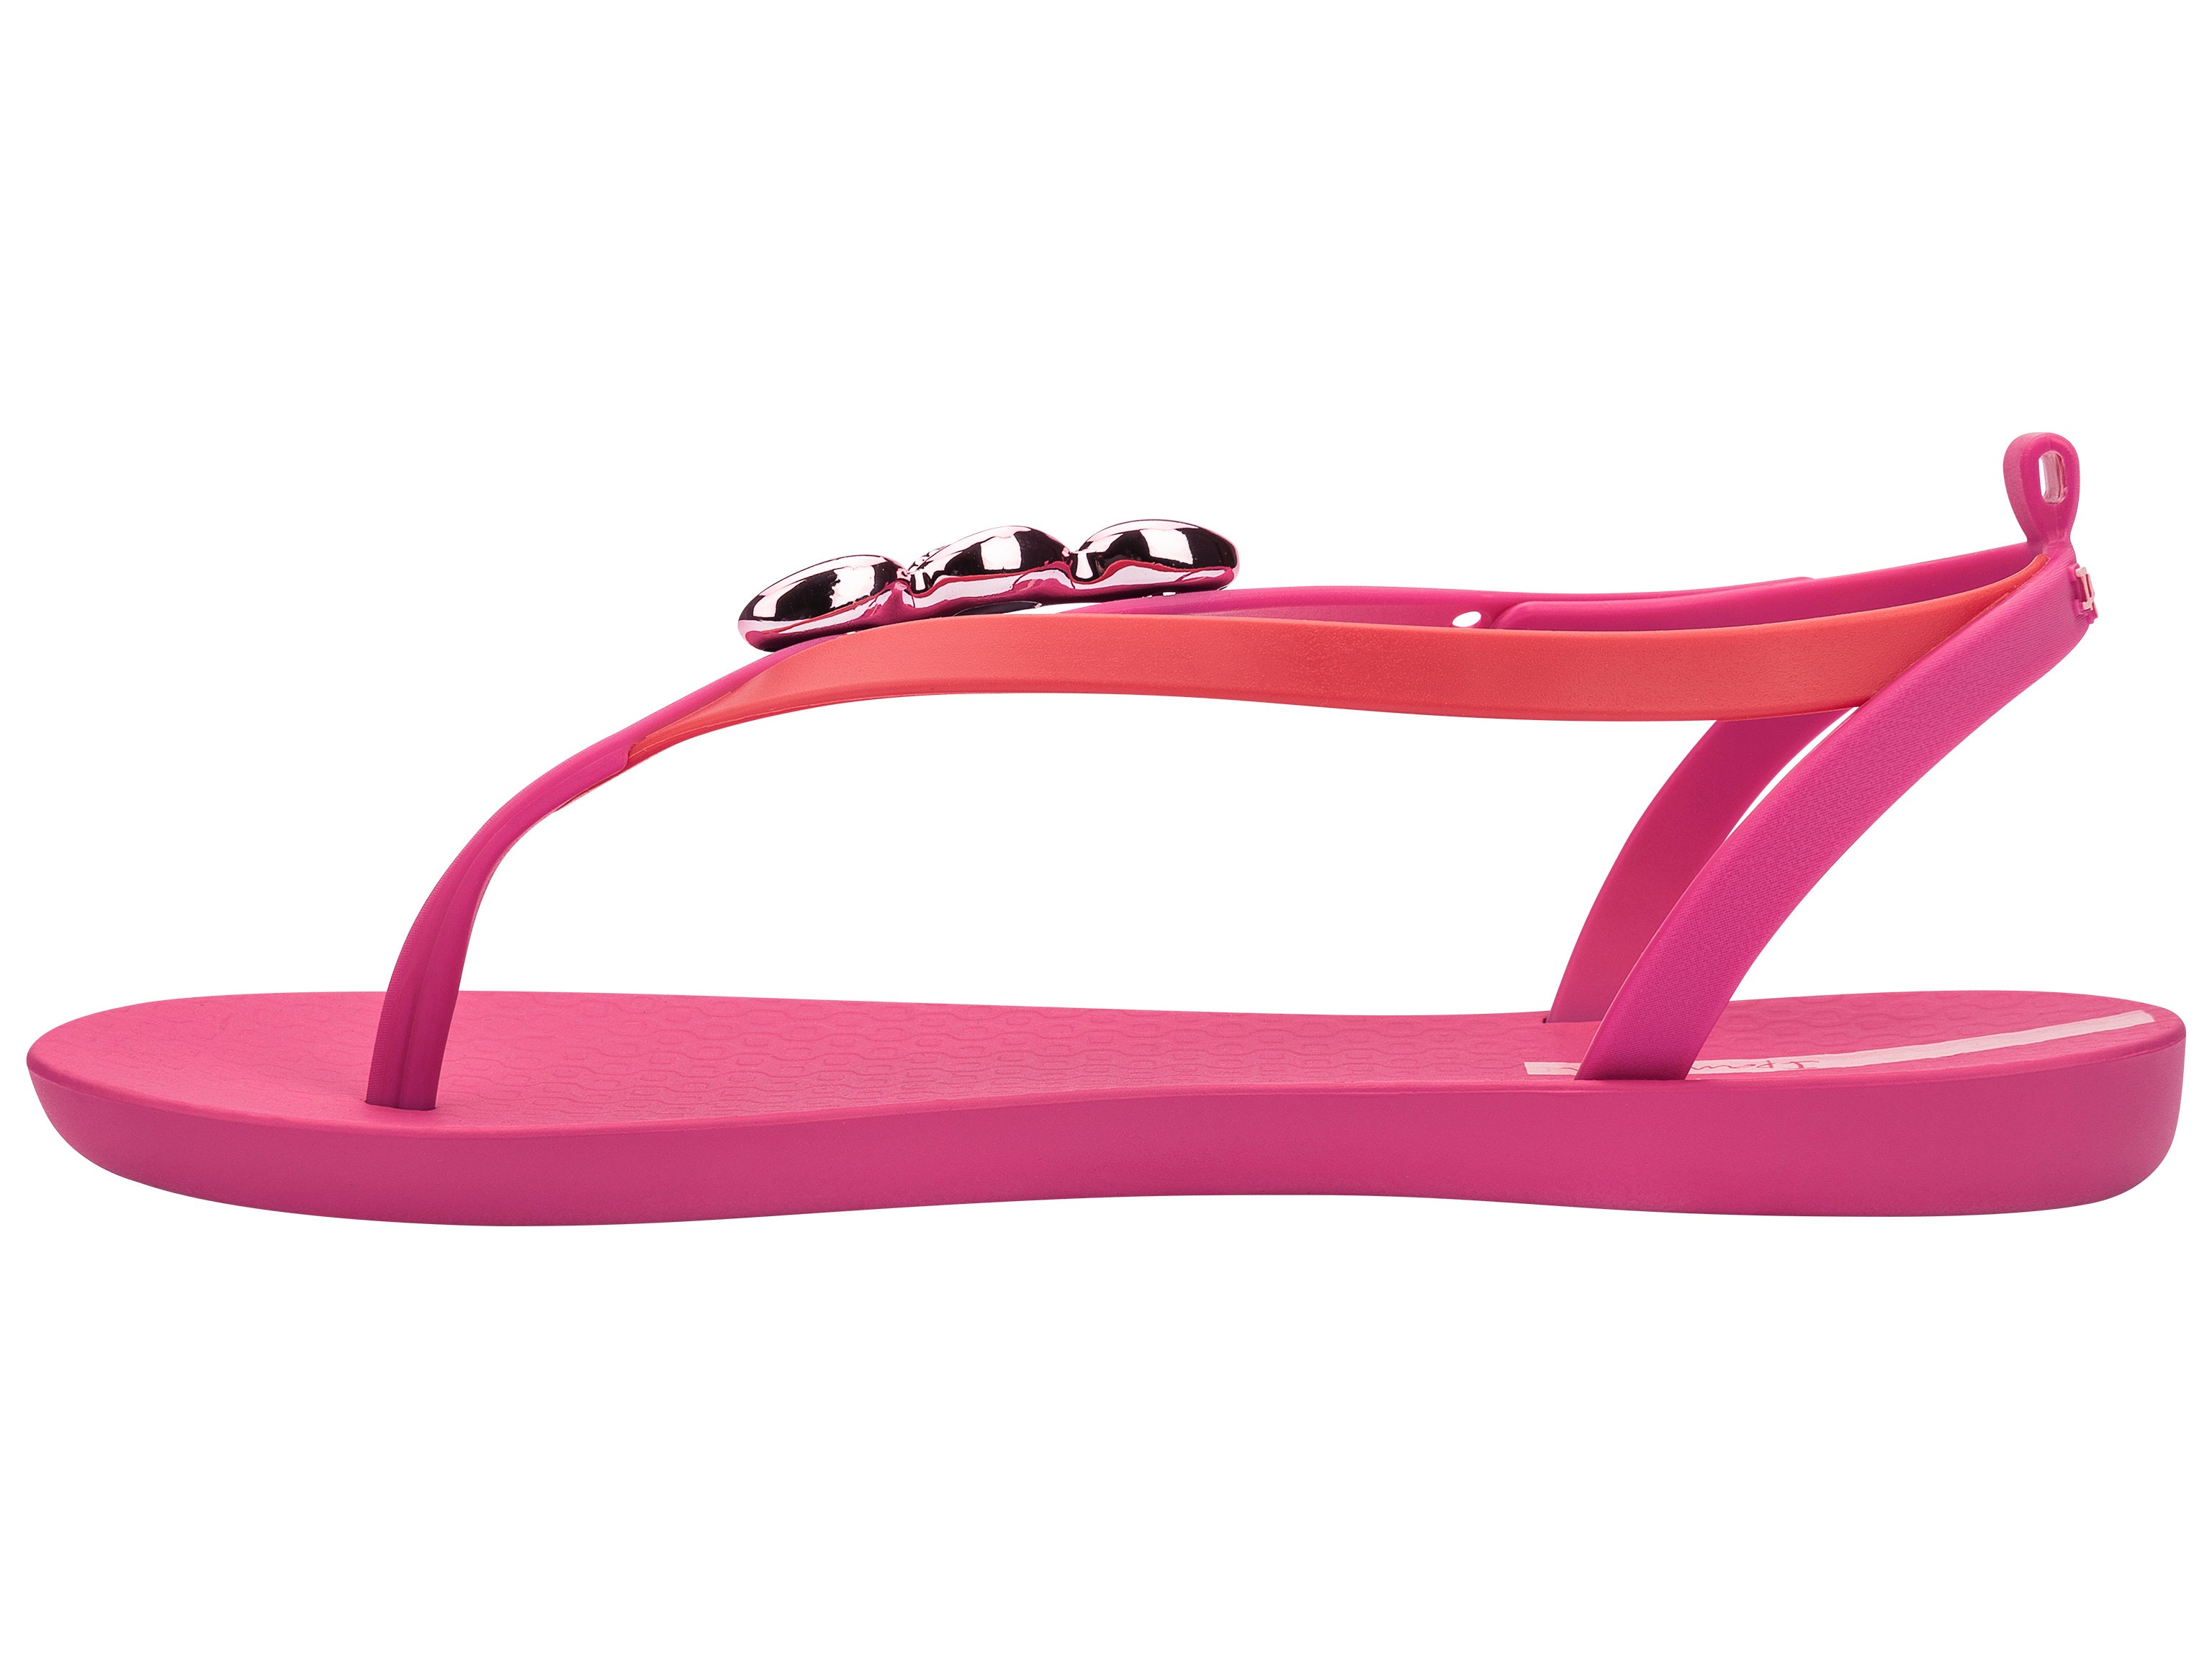 Inner side view of a pink Ipanema Salty women's sandal with 3 pink metallic shells on the strap.